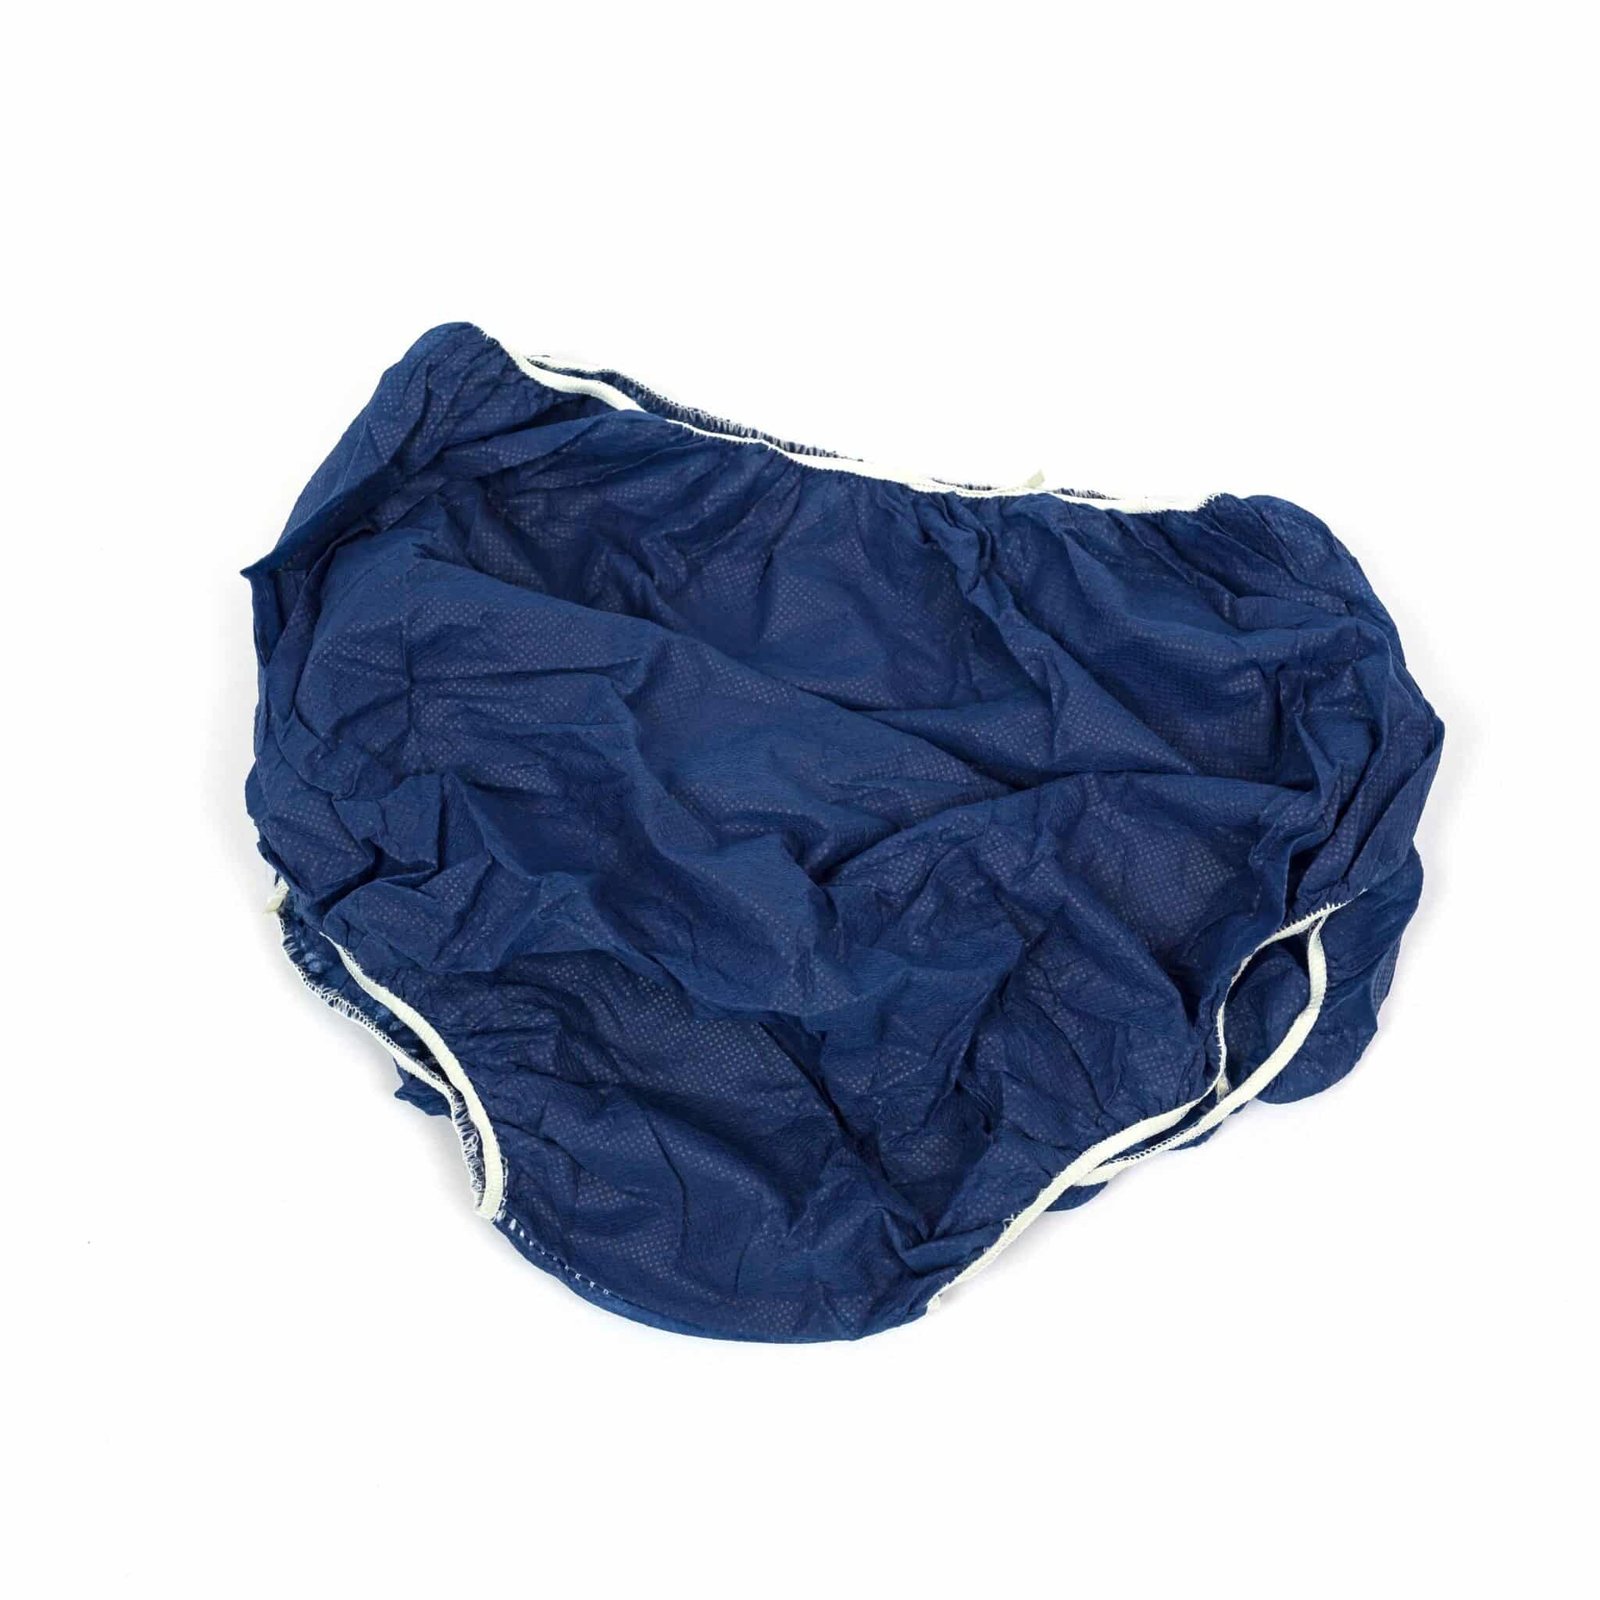 Non-Woven Women's Panties: Soft, Breathable & Durable for All